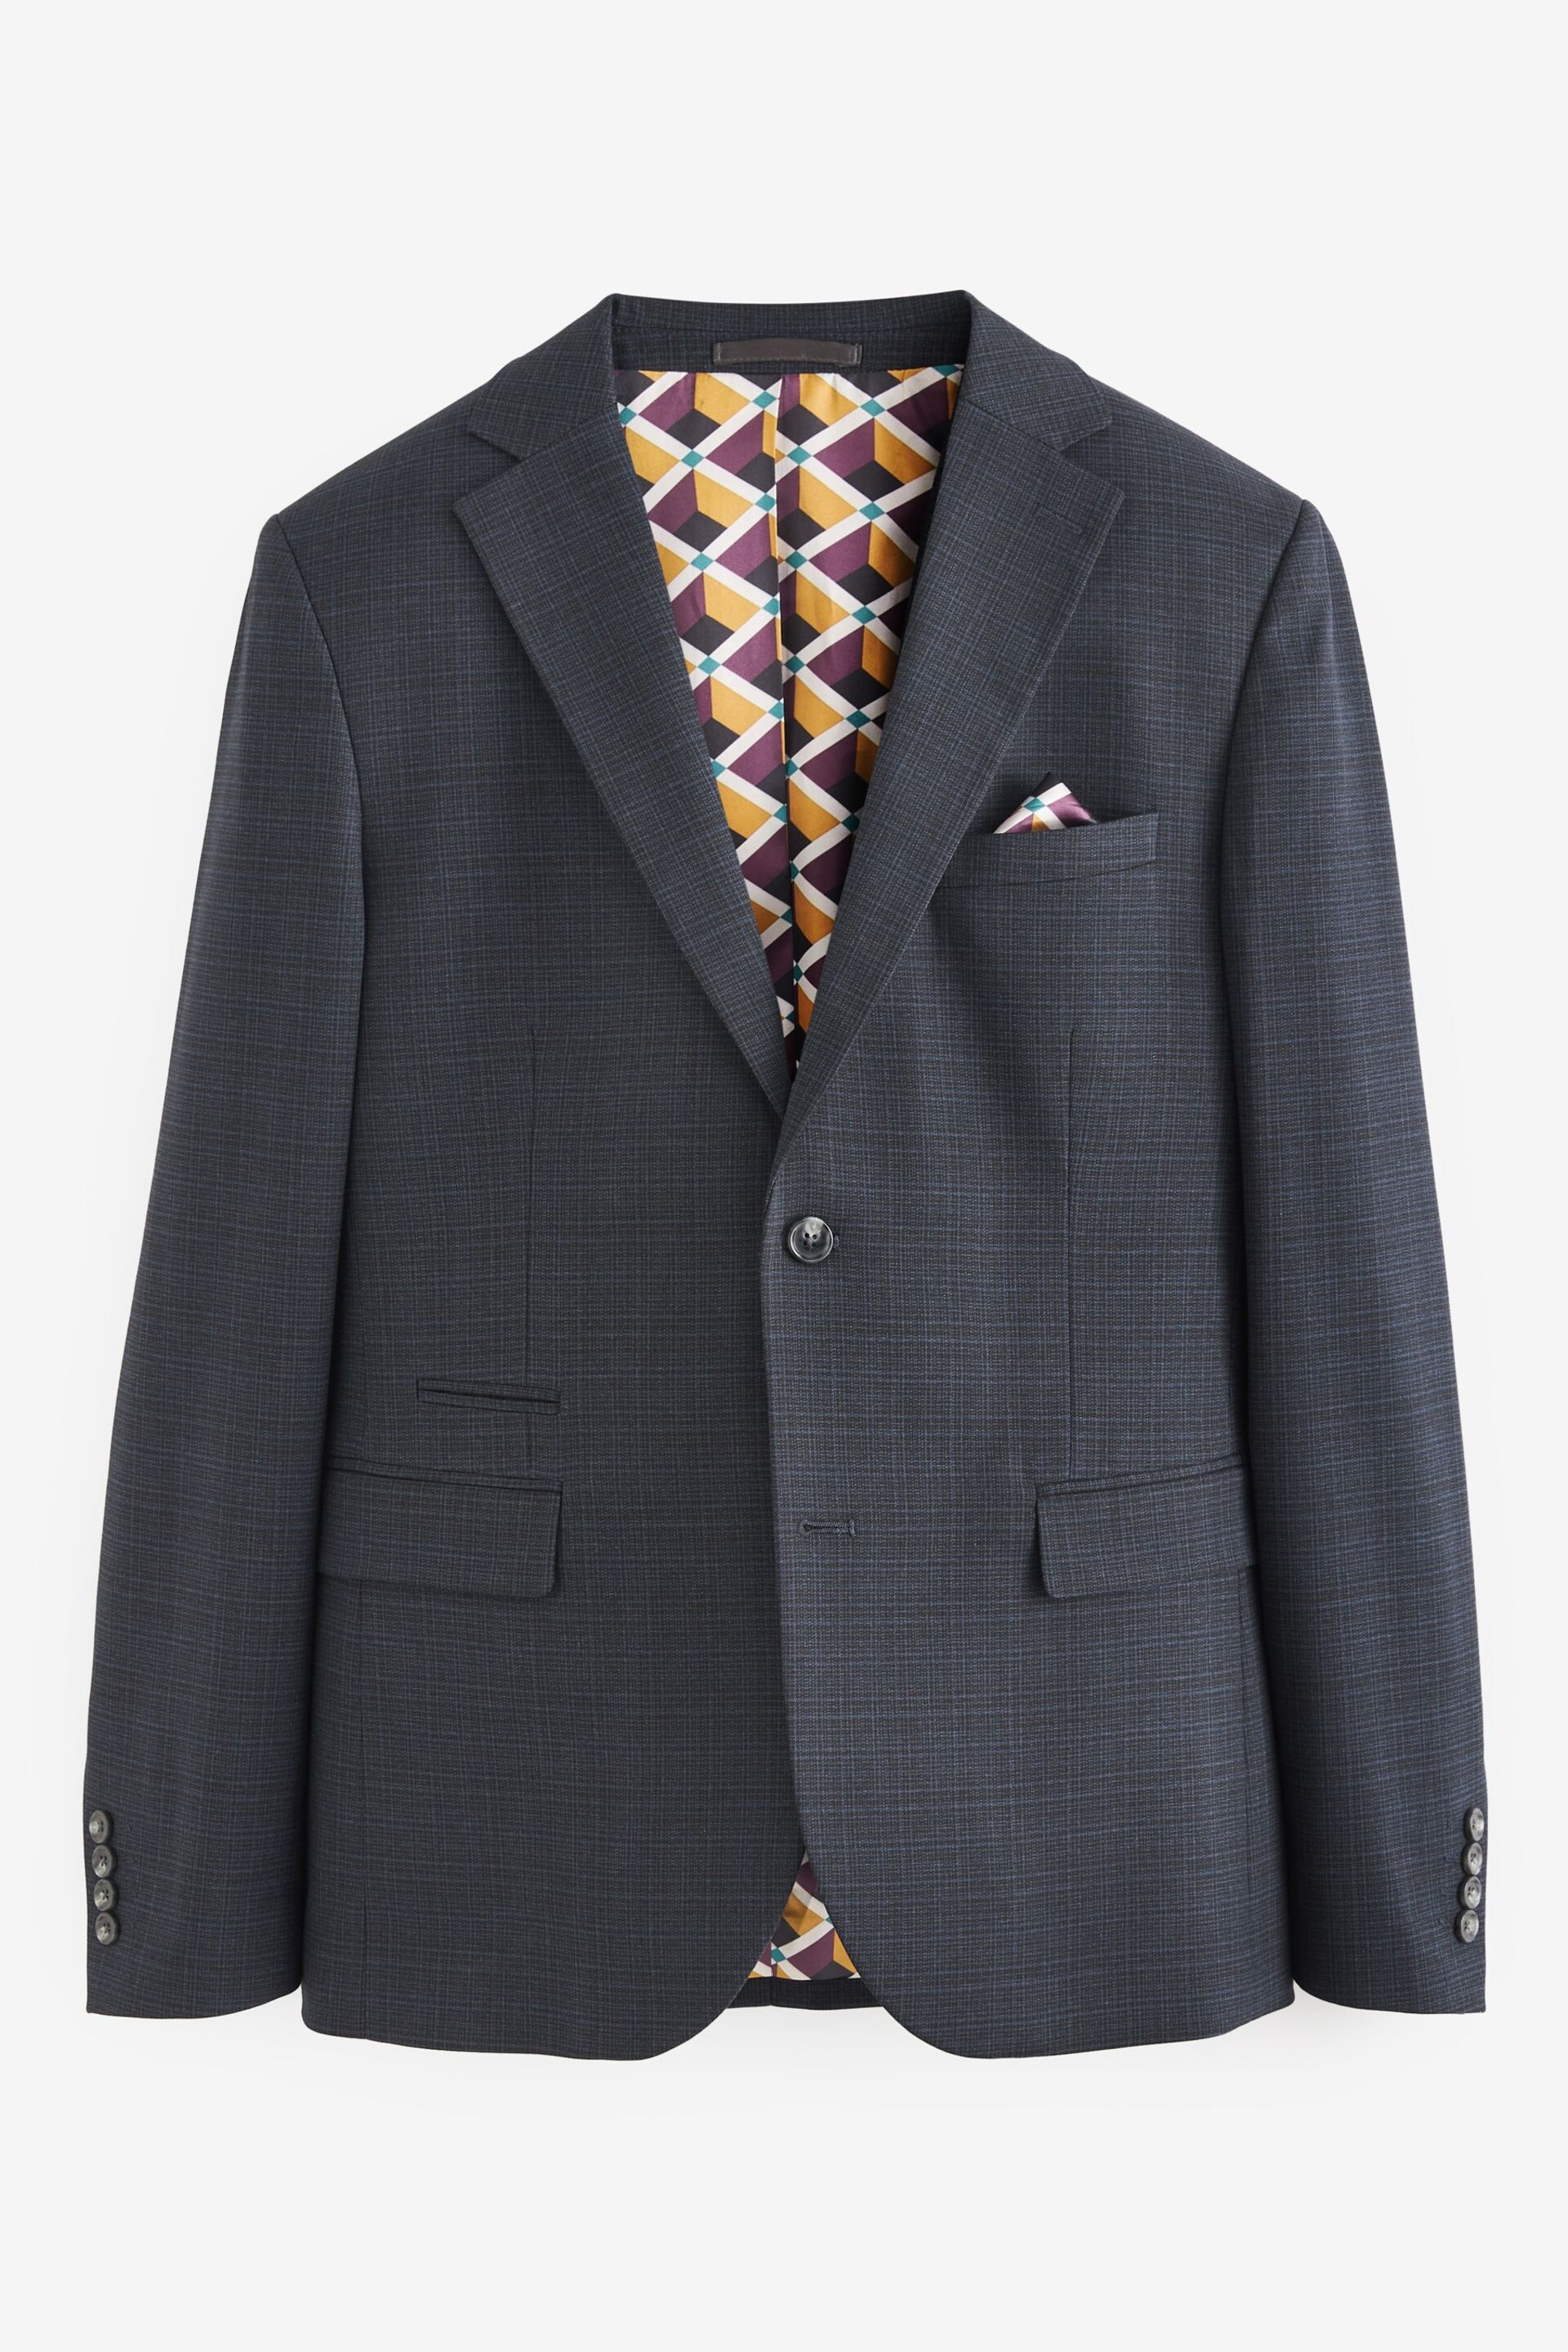 Navy Blue Skinny Check Suit Jacket - Image 7 of 13